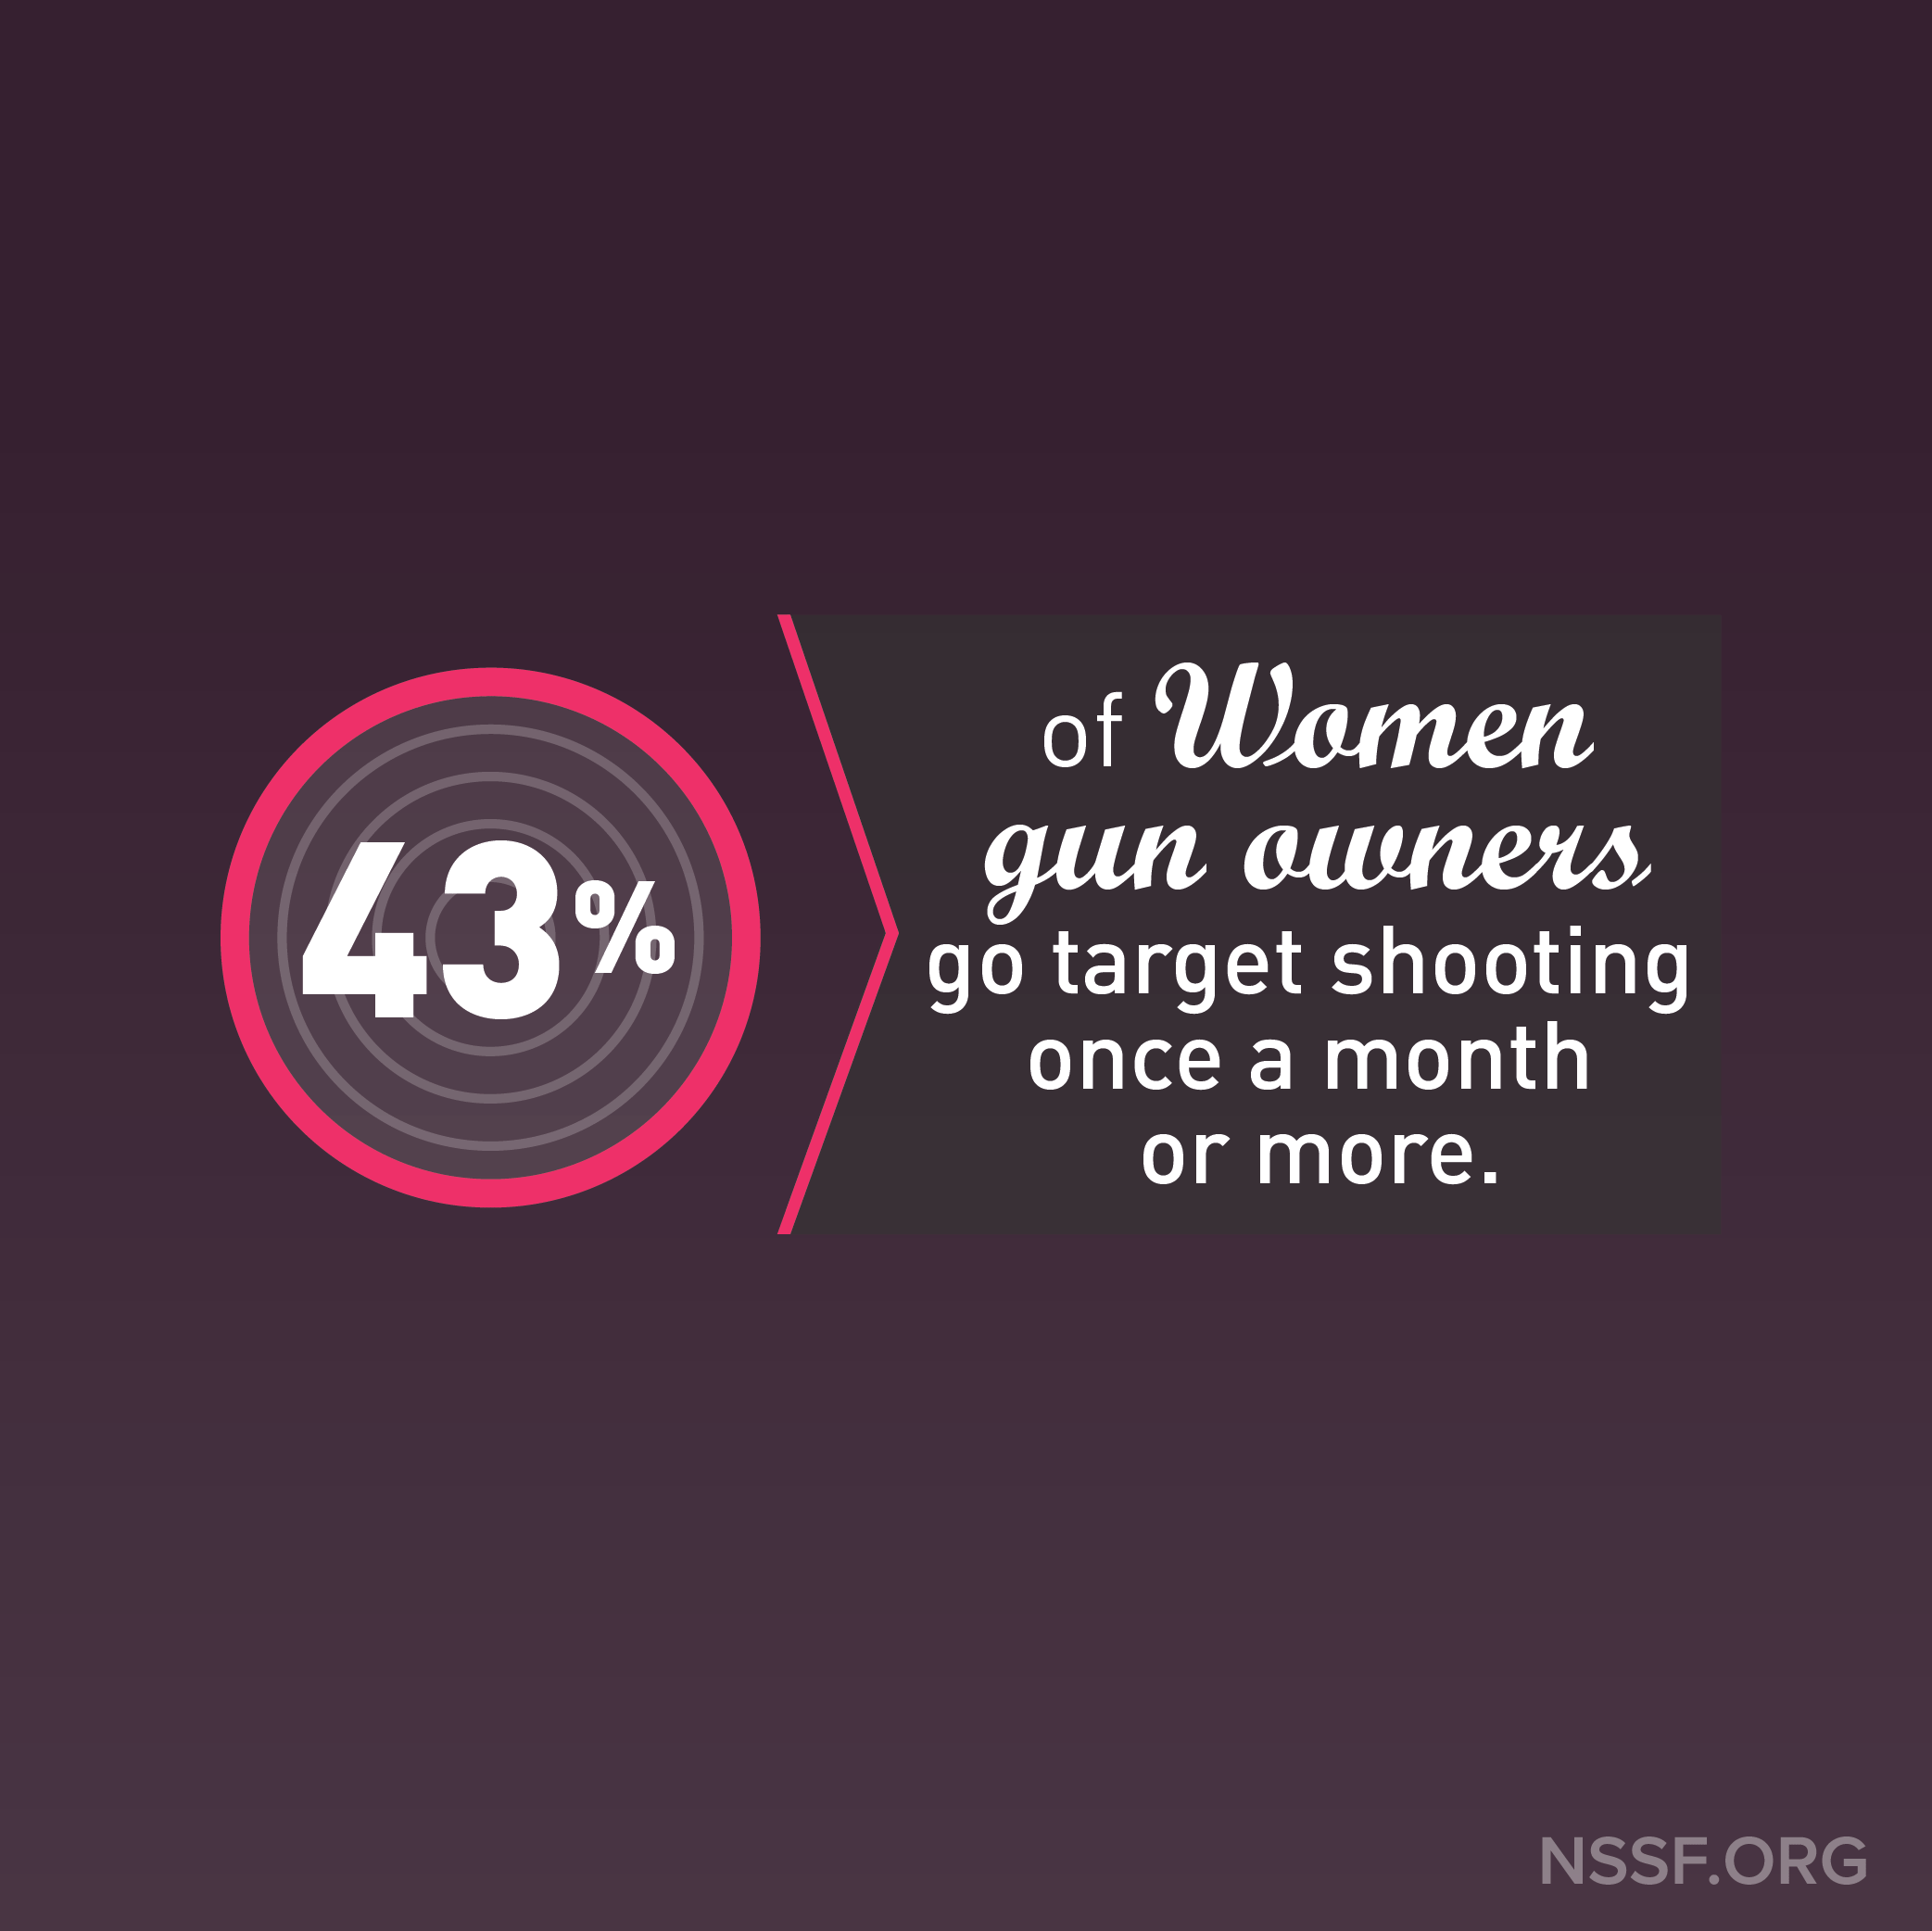 43%25+of+women+gun+owners+go+target+shooting+once+a+month+or+more.